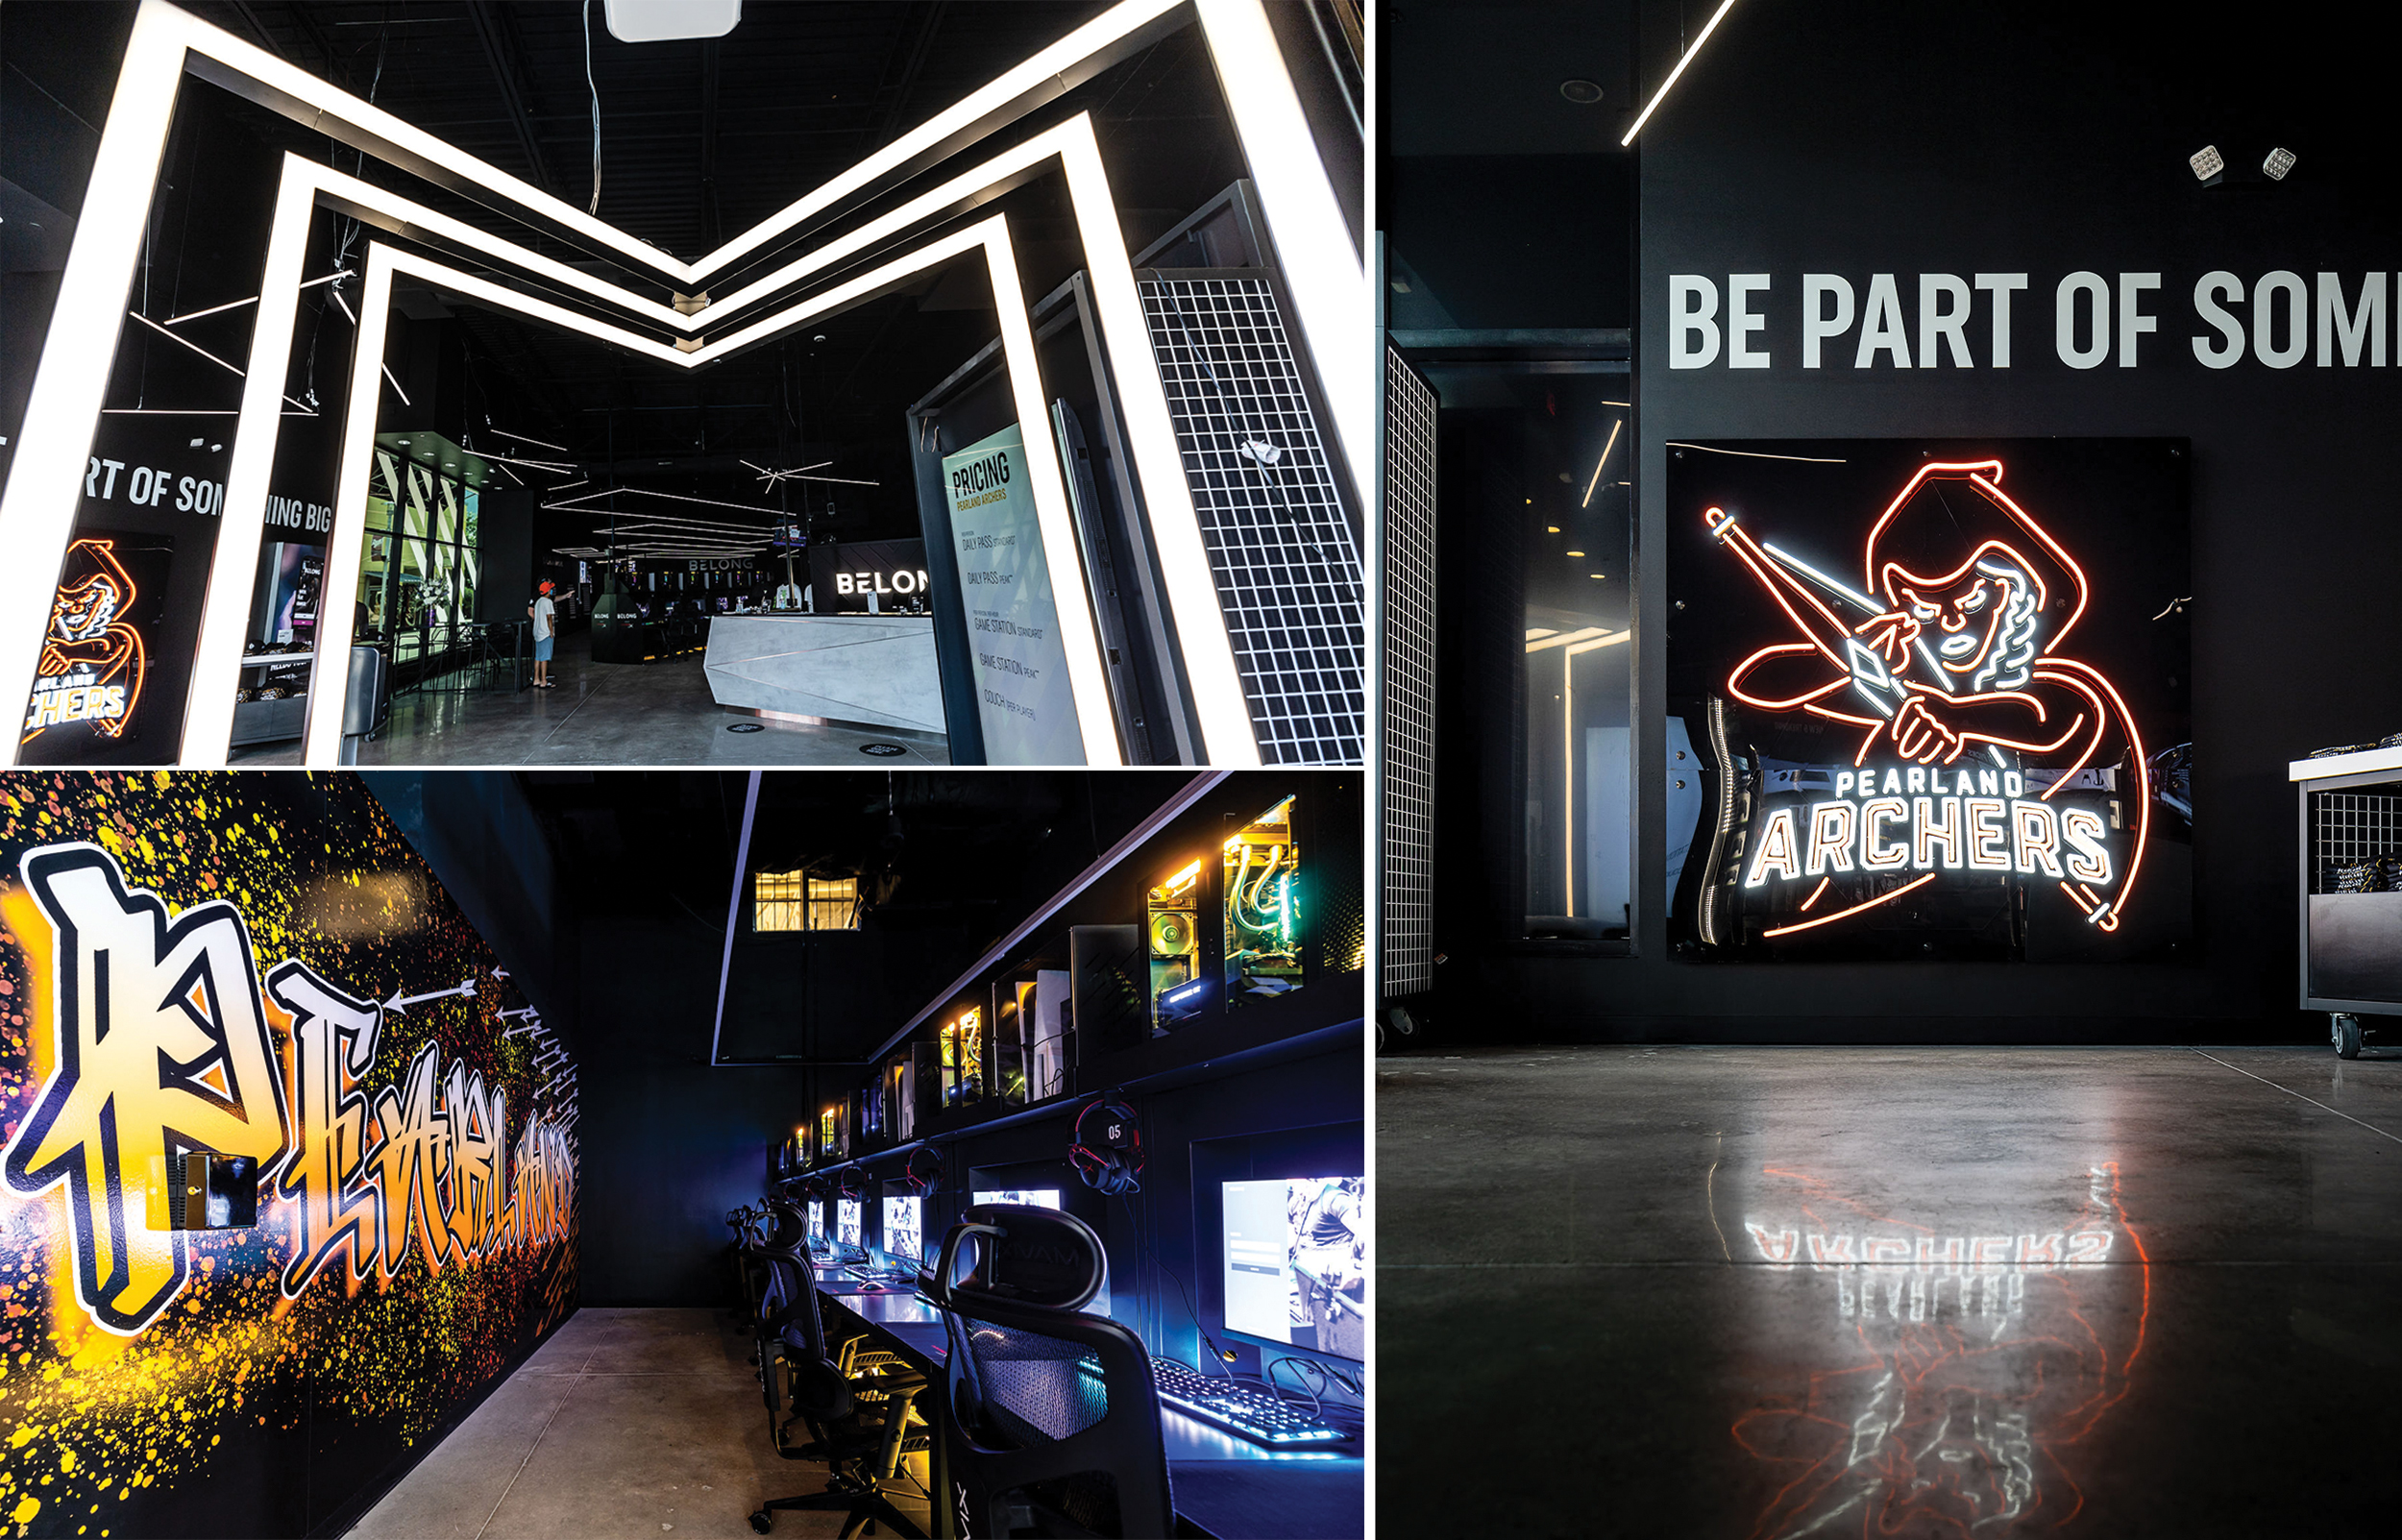 this page Intentionally dark and dramatic, Belong Gaming’s latest concept is set to be rolled out to 500 “arenas” as part of the brand’s global expansion.